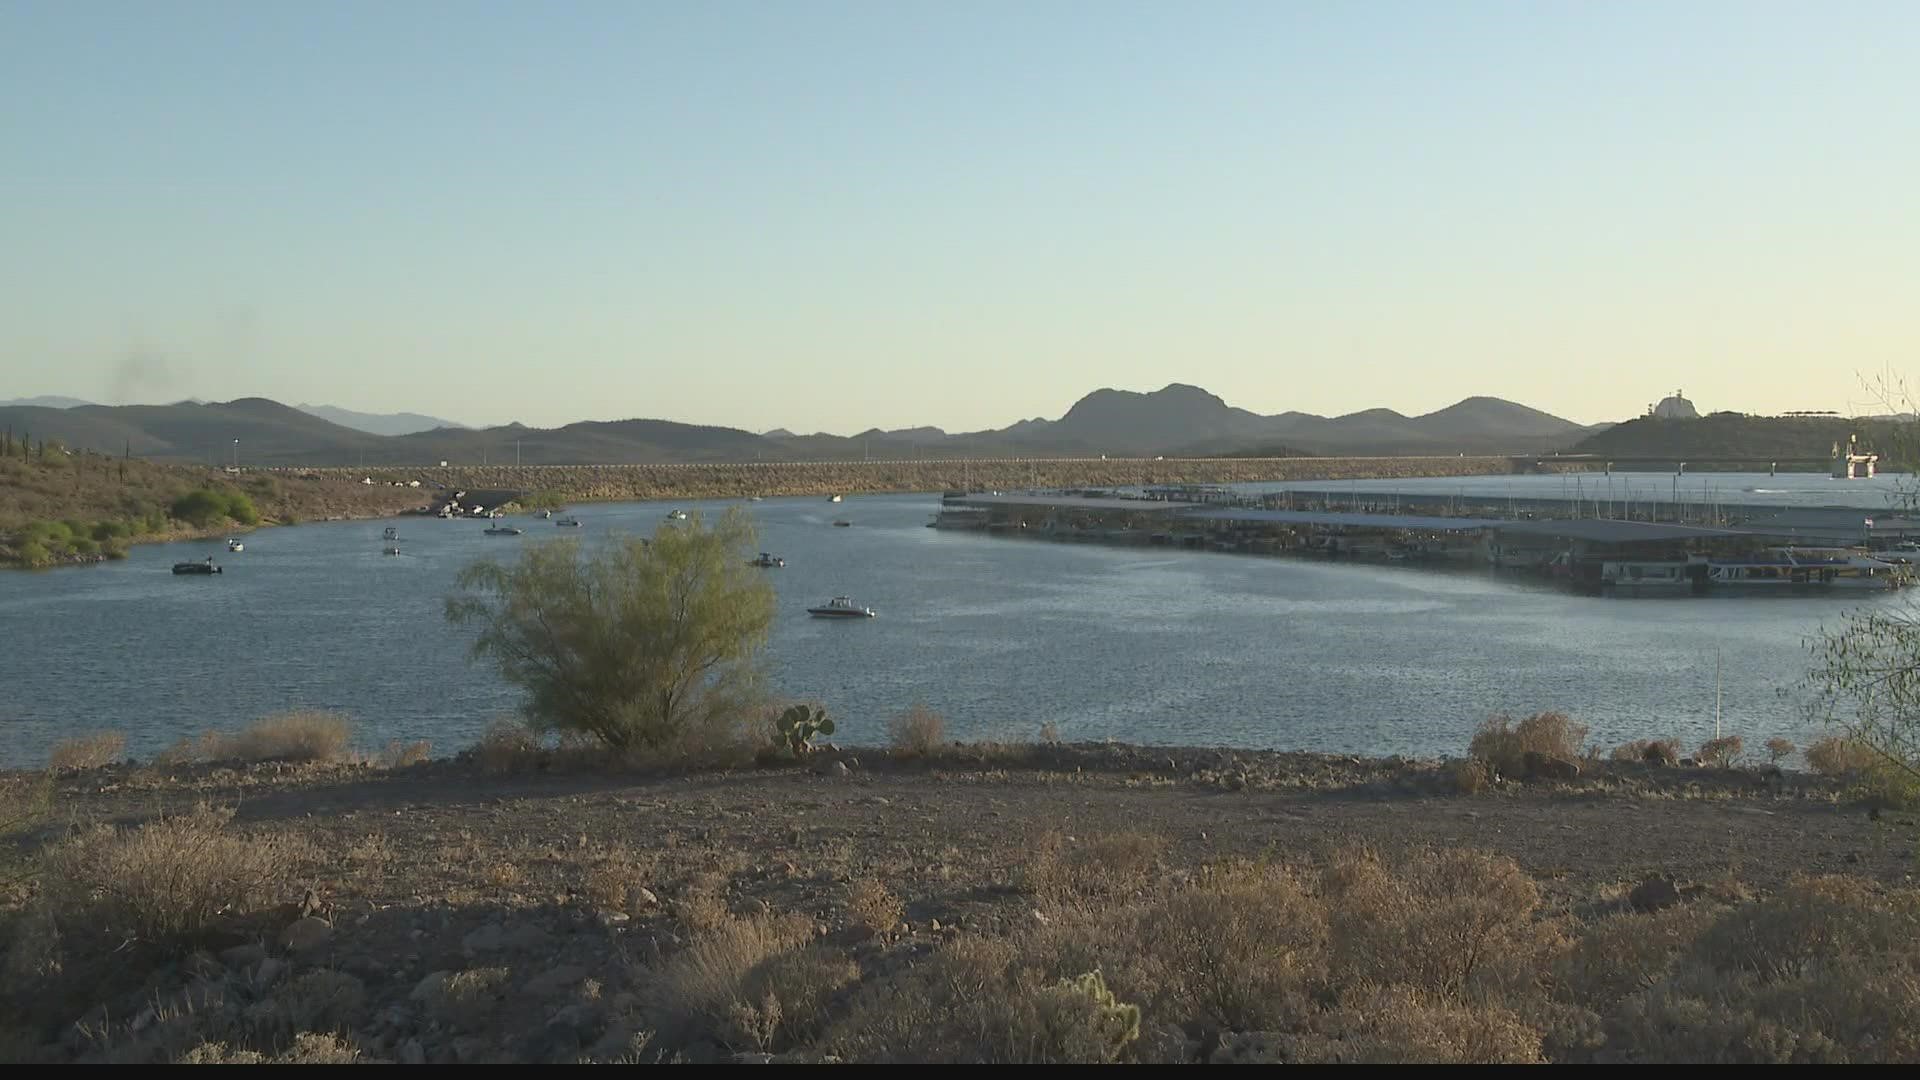 The Maricopa County Sheriff's Office said a woman has died after having her leg amputated in a boating accident at Lake Pleasant Saturday evening.